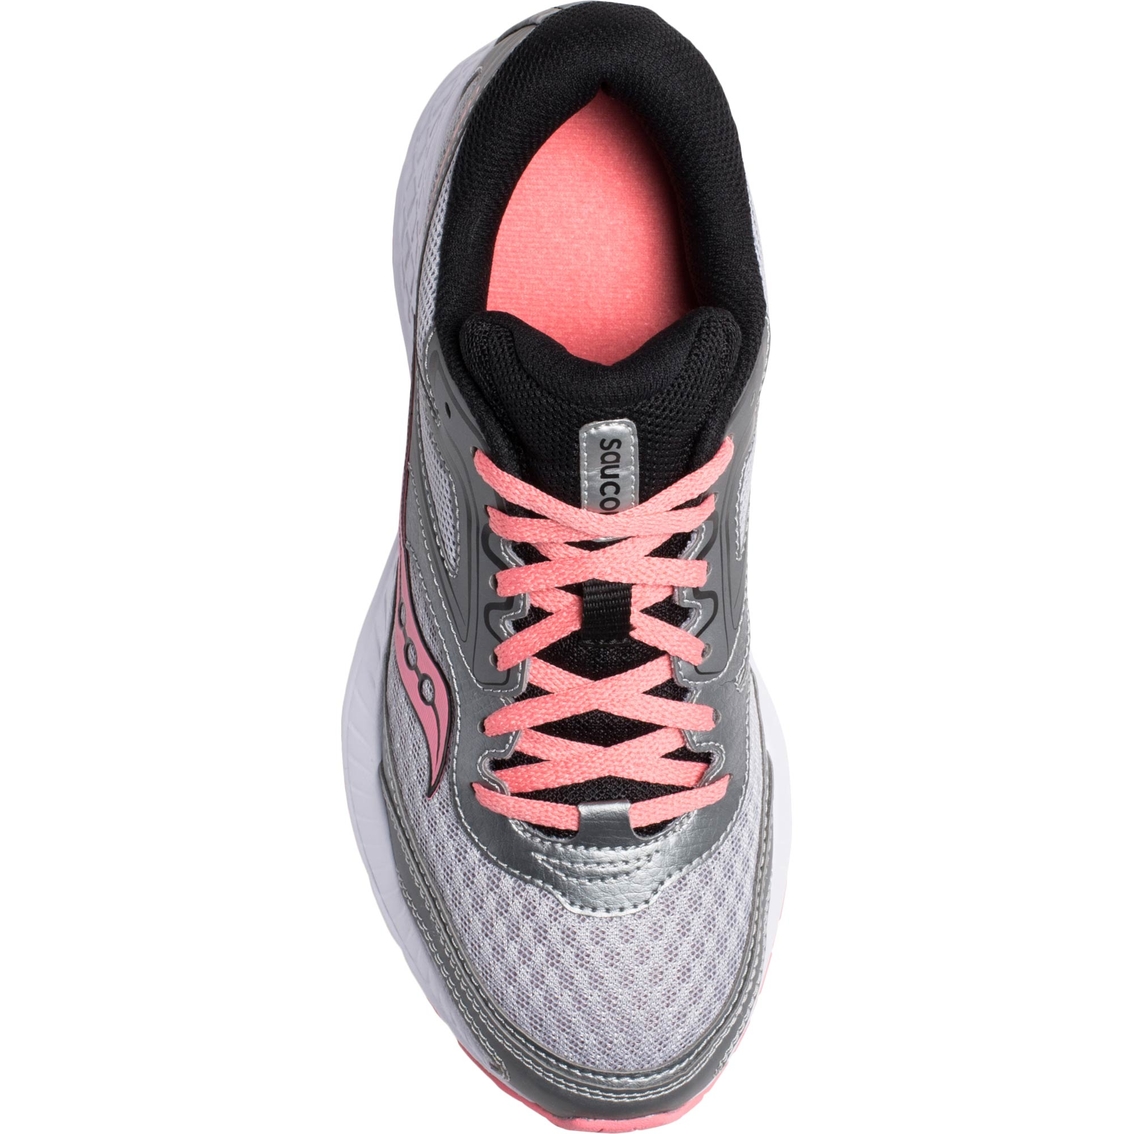 Saucony Women's Cohesion 12 Running Shoes - Image 3 of 4